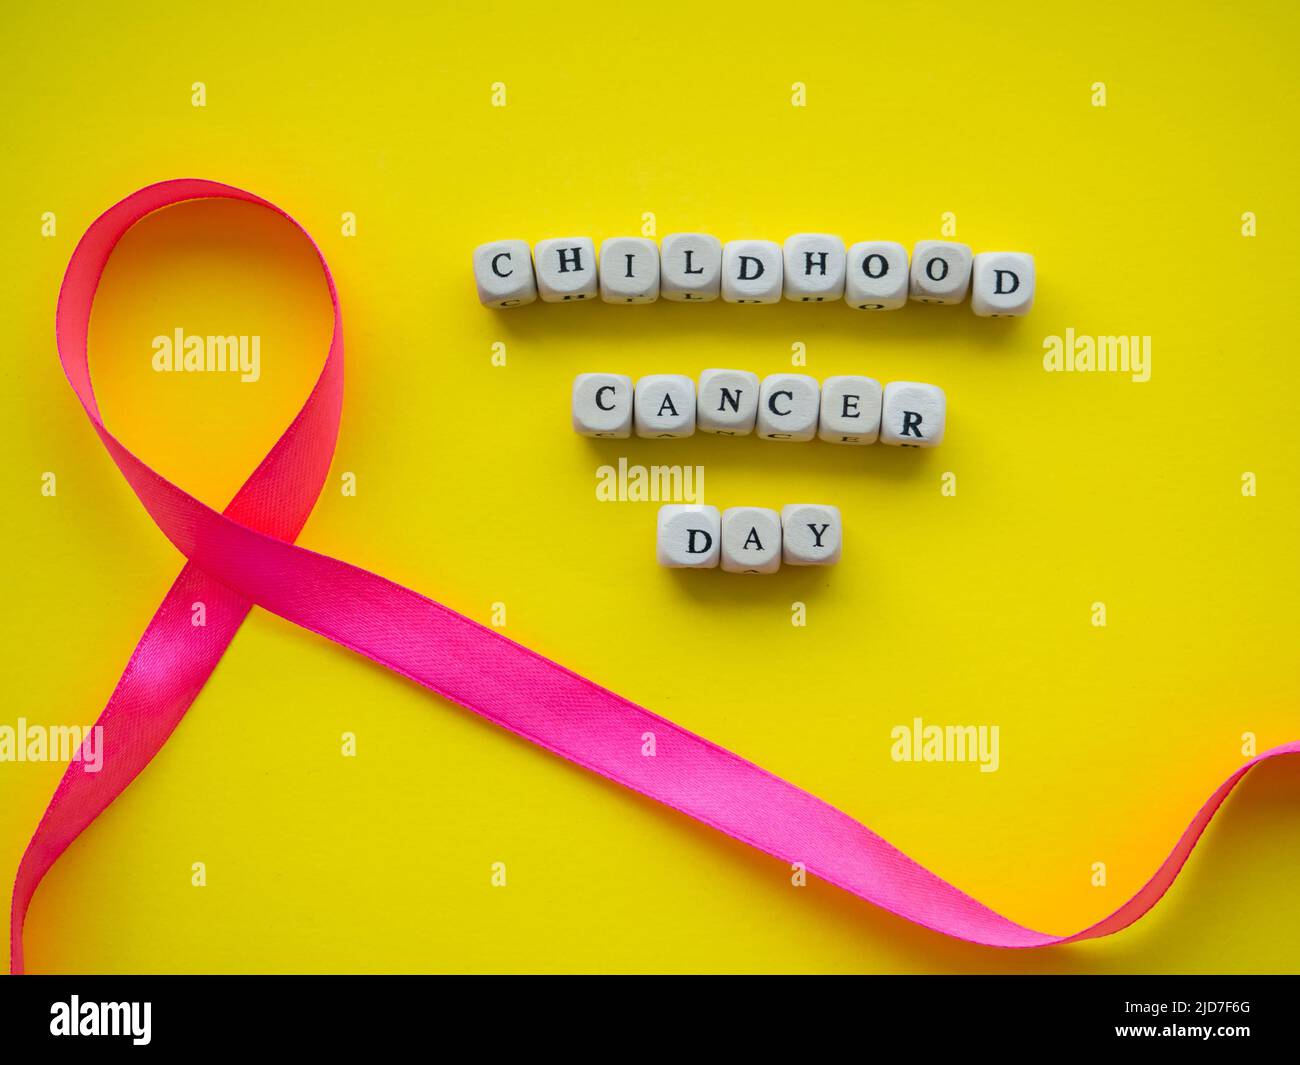 Childhood Cancer Day Stock Photo